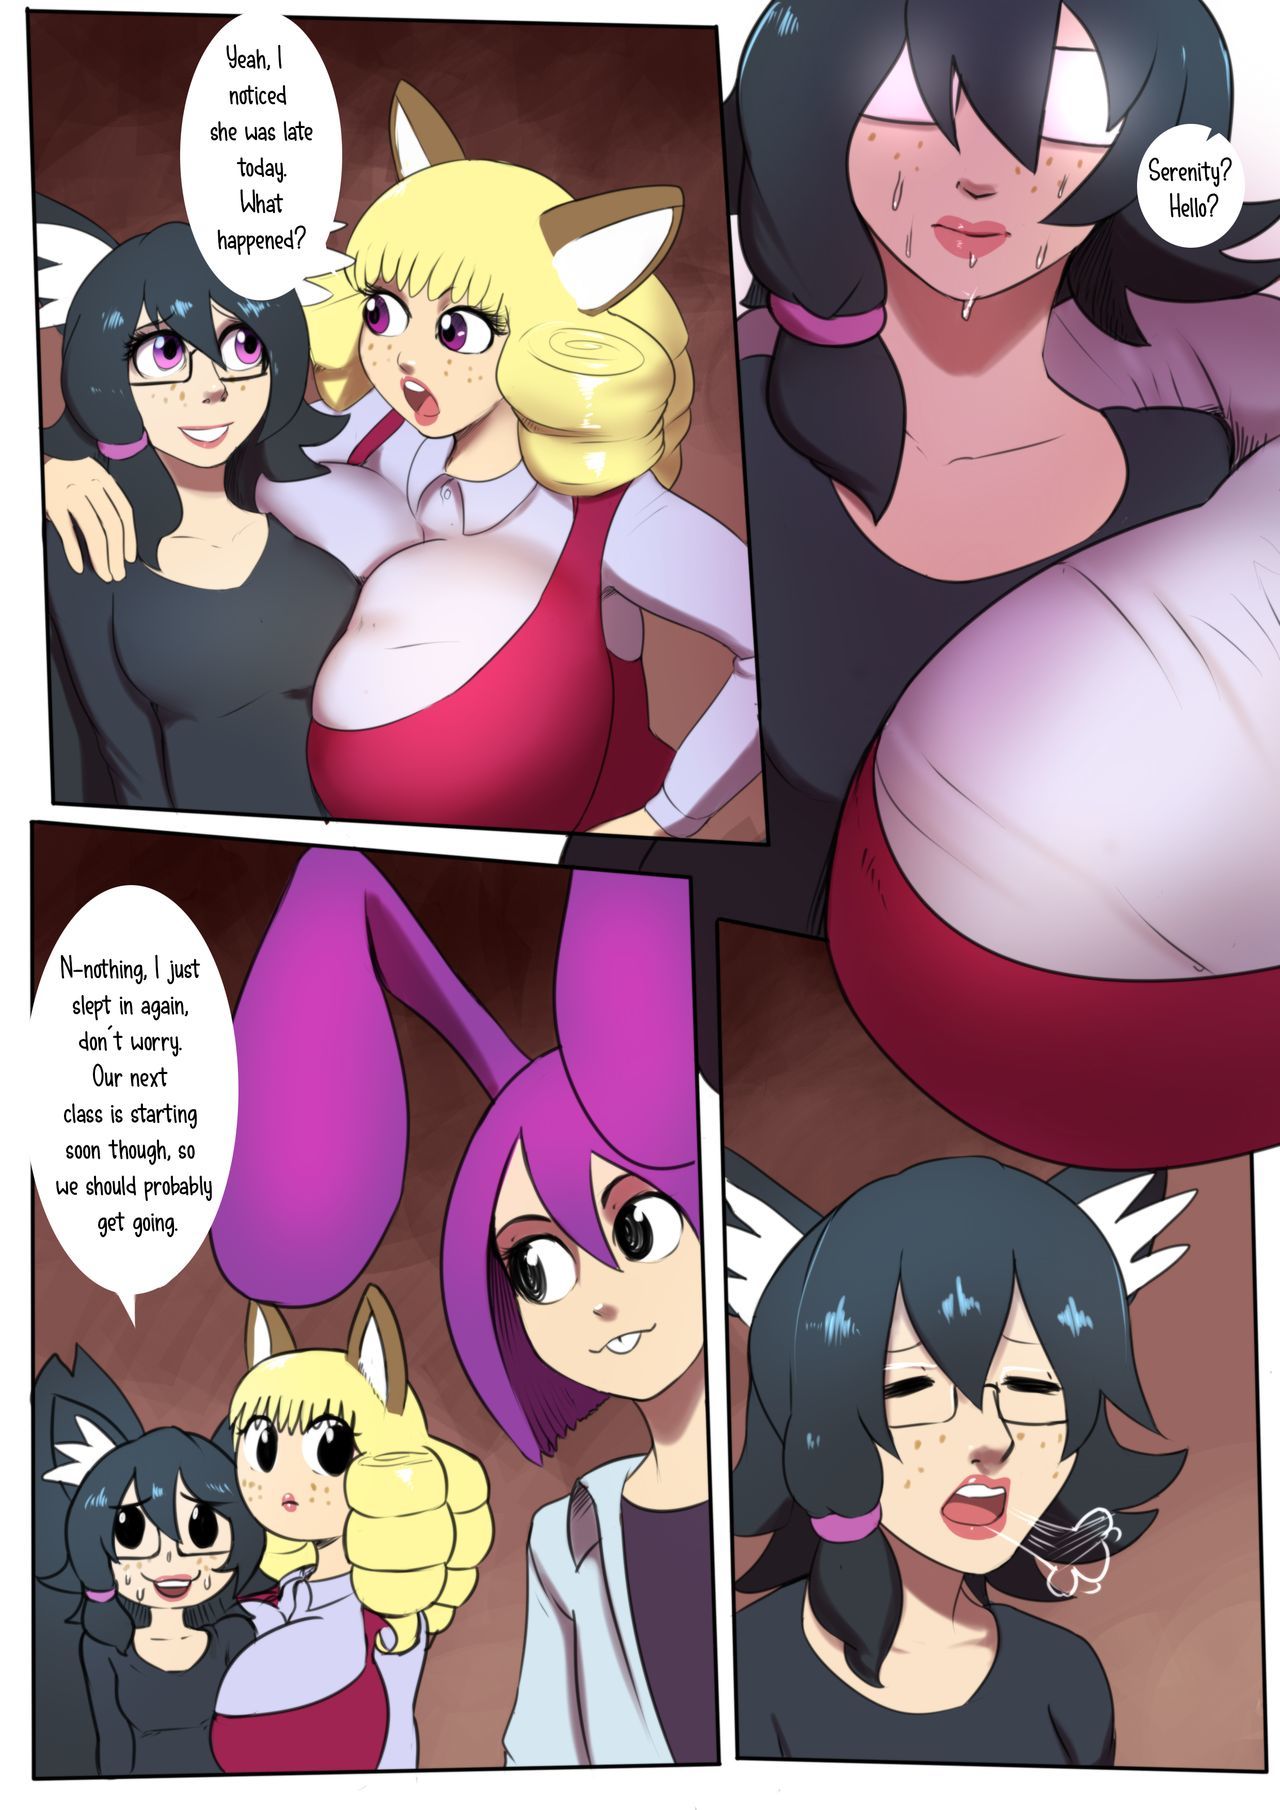 A Semblance of Serenity by Lemonfont page 12